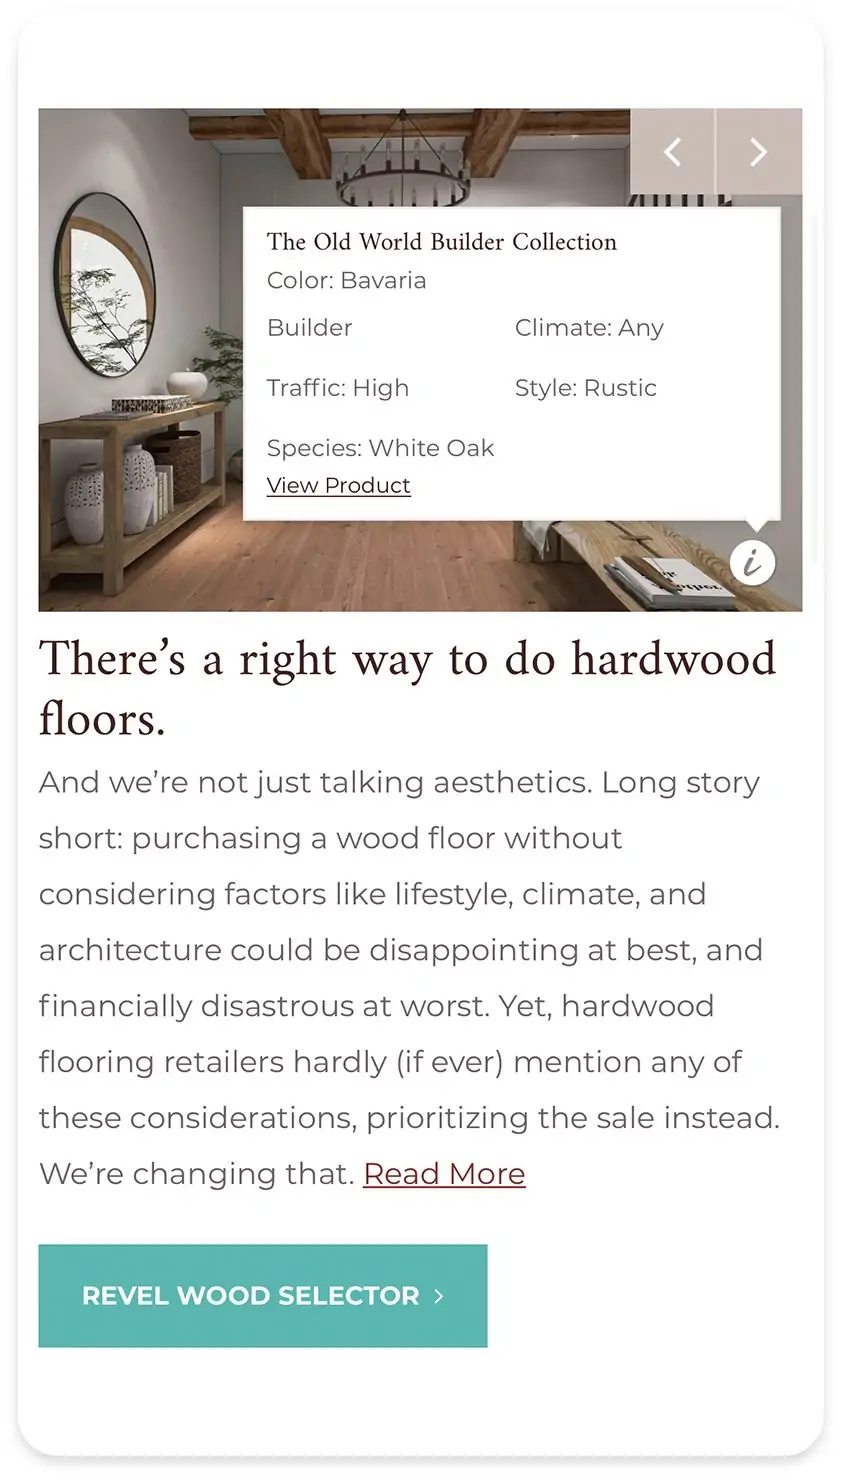 image from the mobile revel woods website that has an image with a text box over it and a headline that reads "there's a right way to do hardwood floors" and a button that reads "revel wood selector"